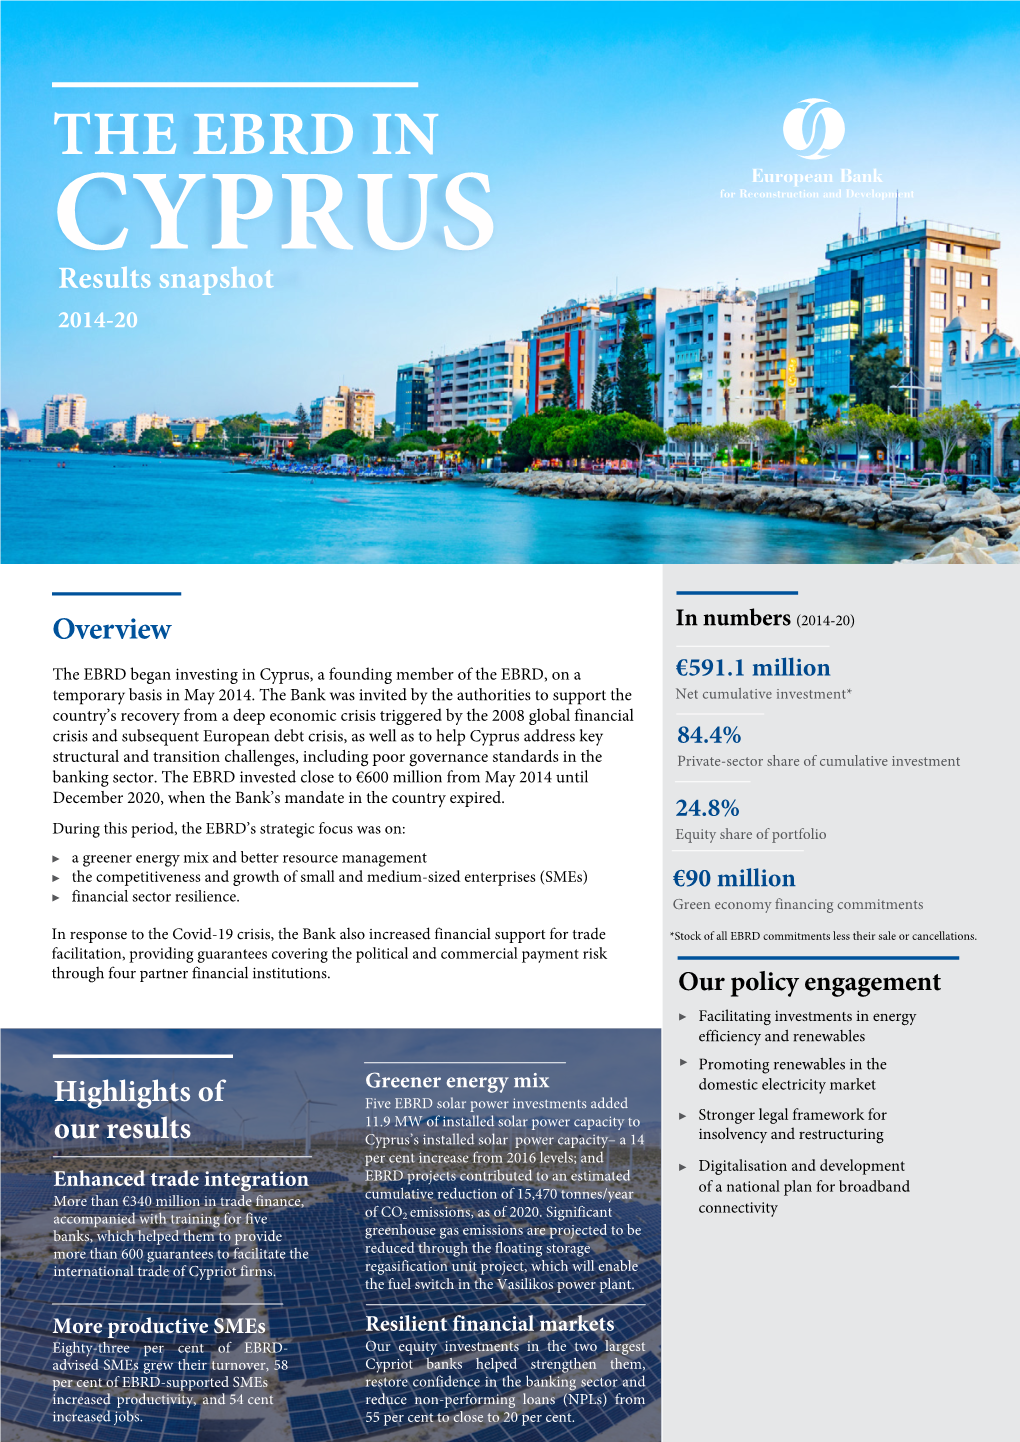 THE EBRD in CYPRUS Results Snapshot 2014-20